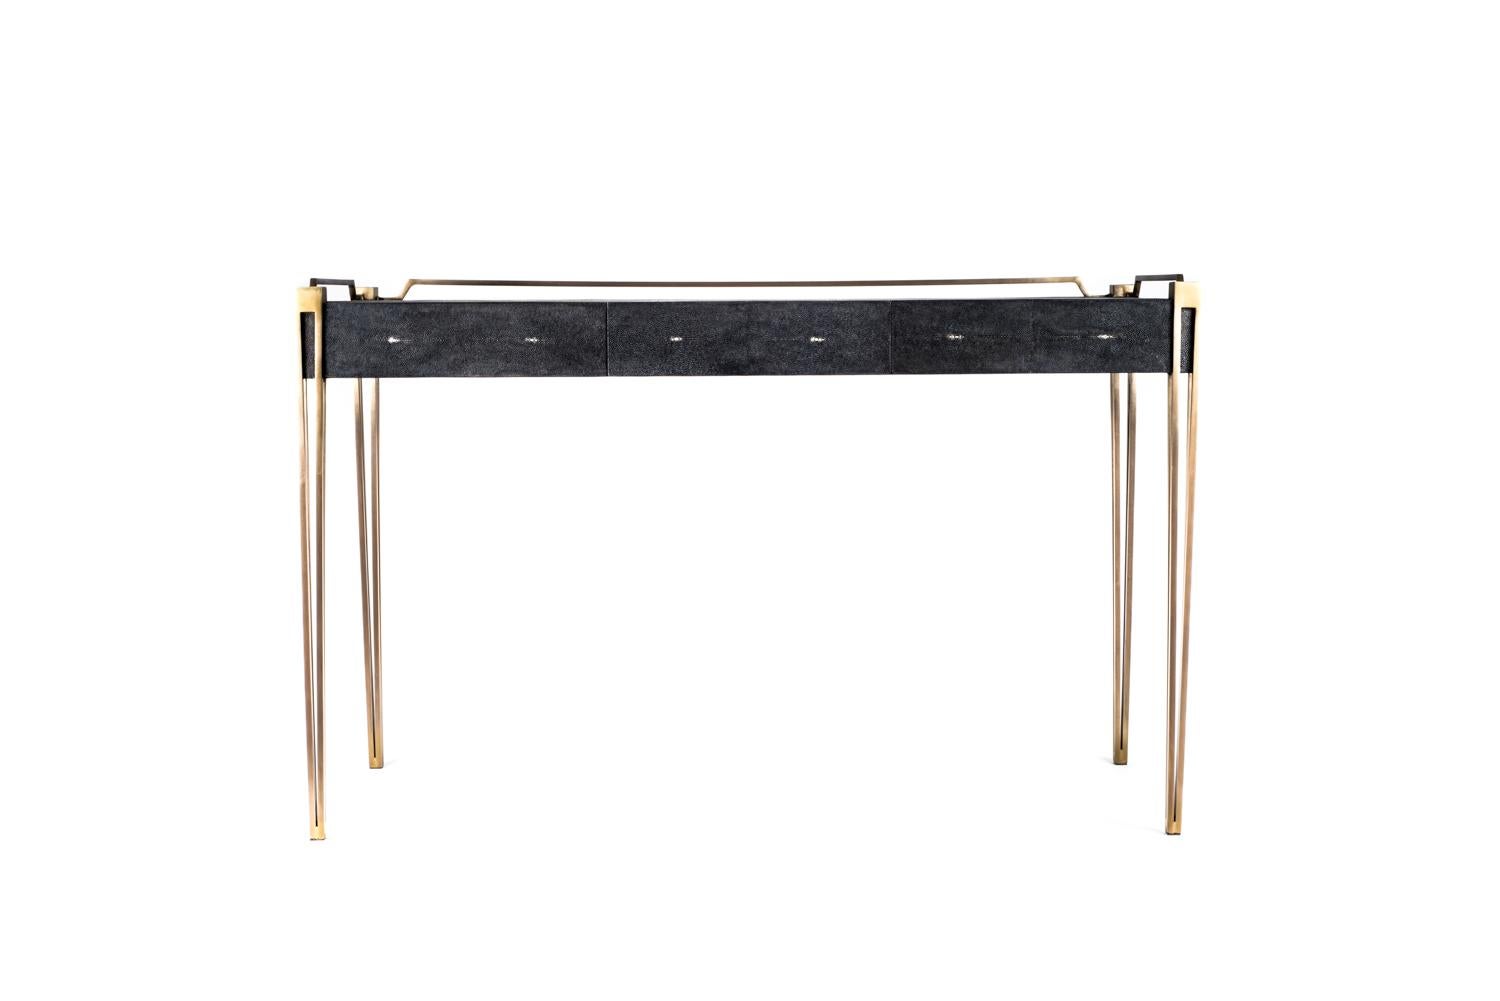 The Soho Writing Desk is the perfect piece for a living room, bedroom or office space that merges vintage and modern sensibility. Add a mirror and this desk becomes a vanity table. The surface of this desk is inlaid in black shagreen, framed with